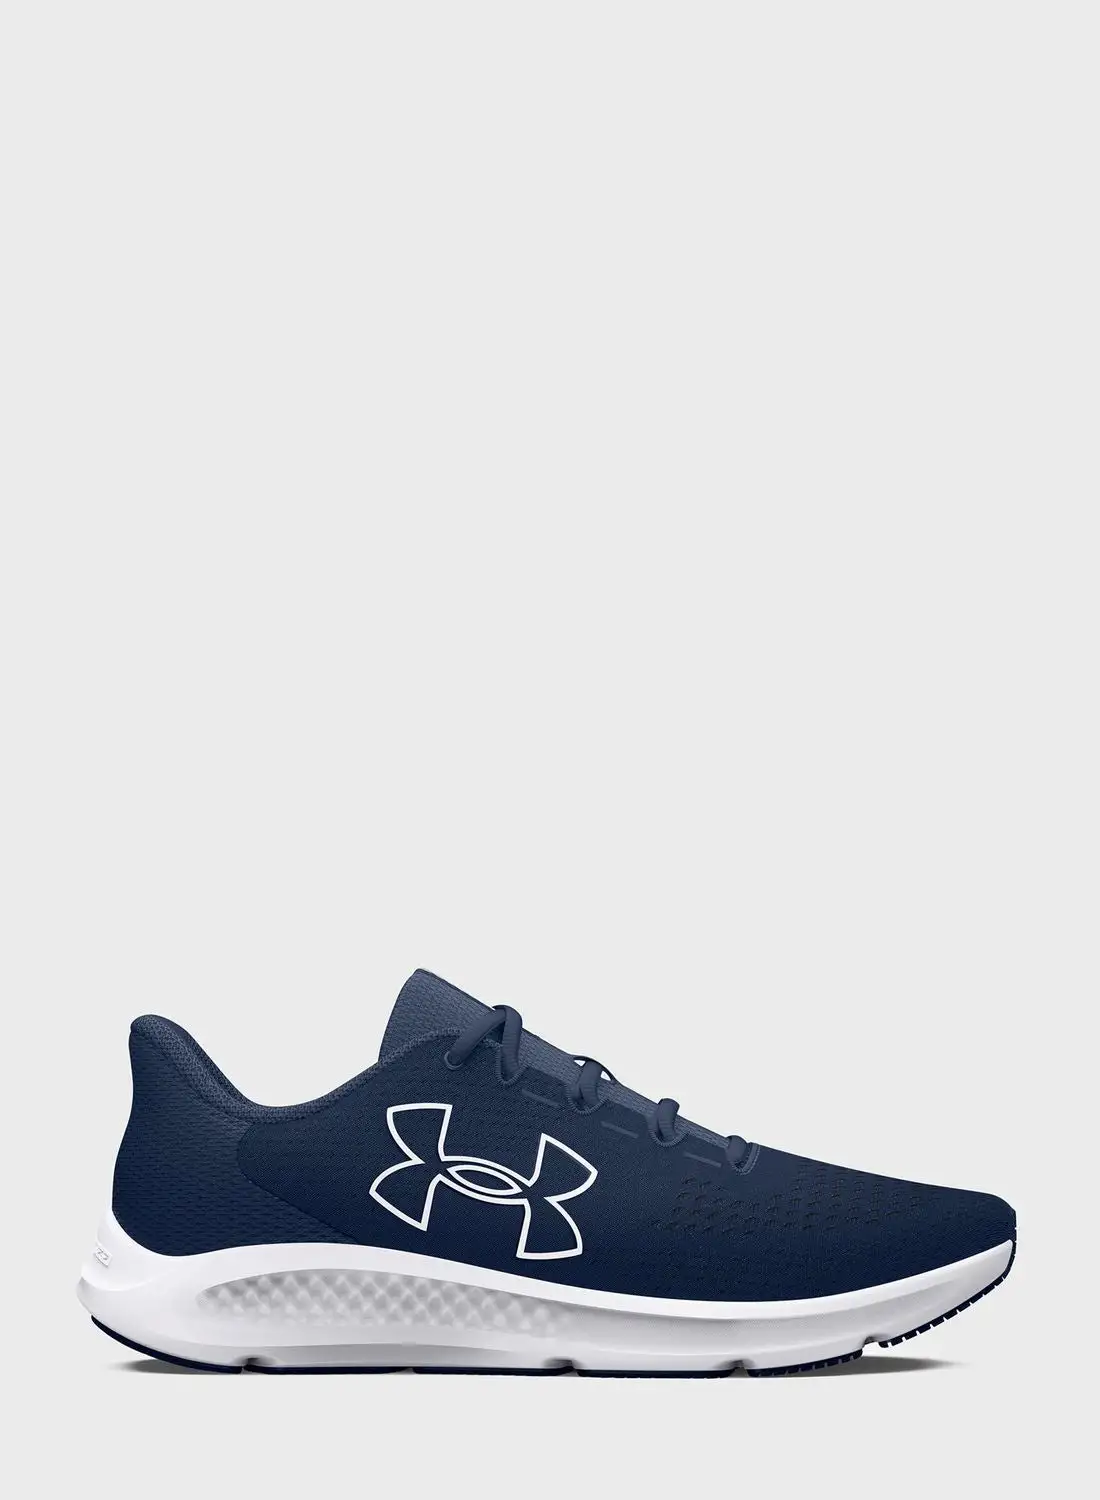 UNDER ARMOUR Charged Pursuit 3 BL Running Shoes